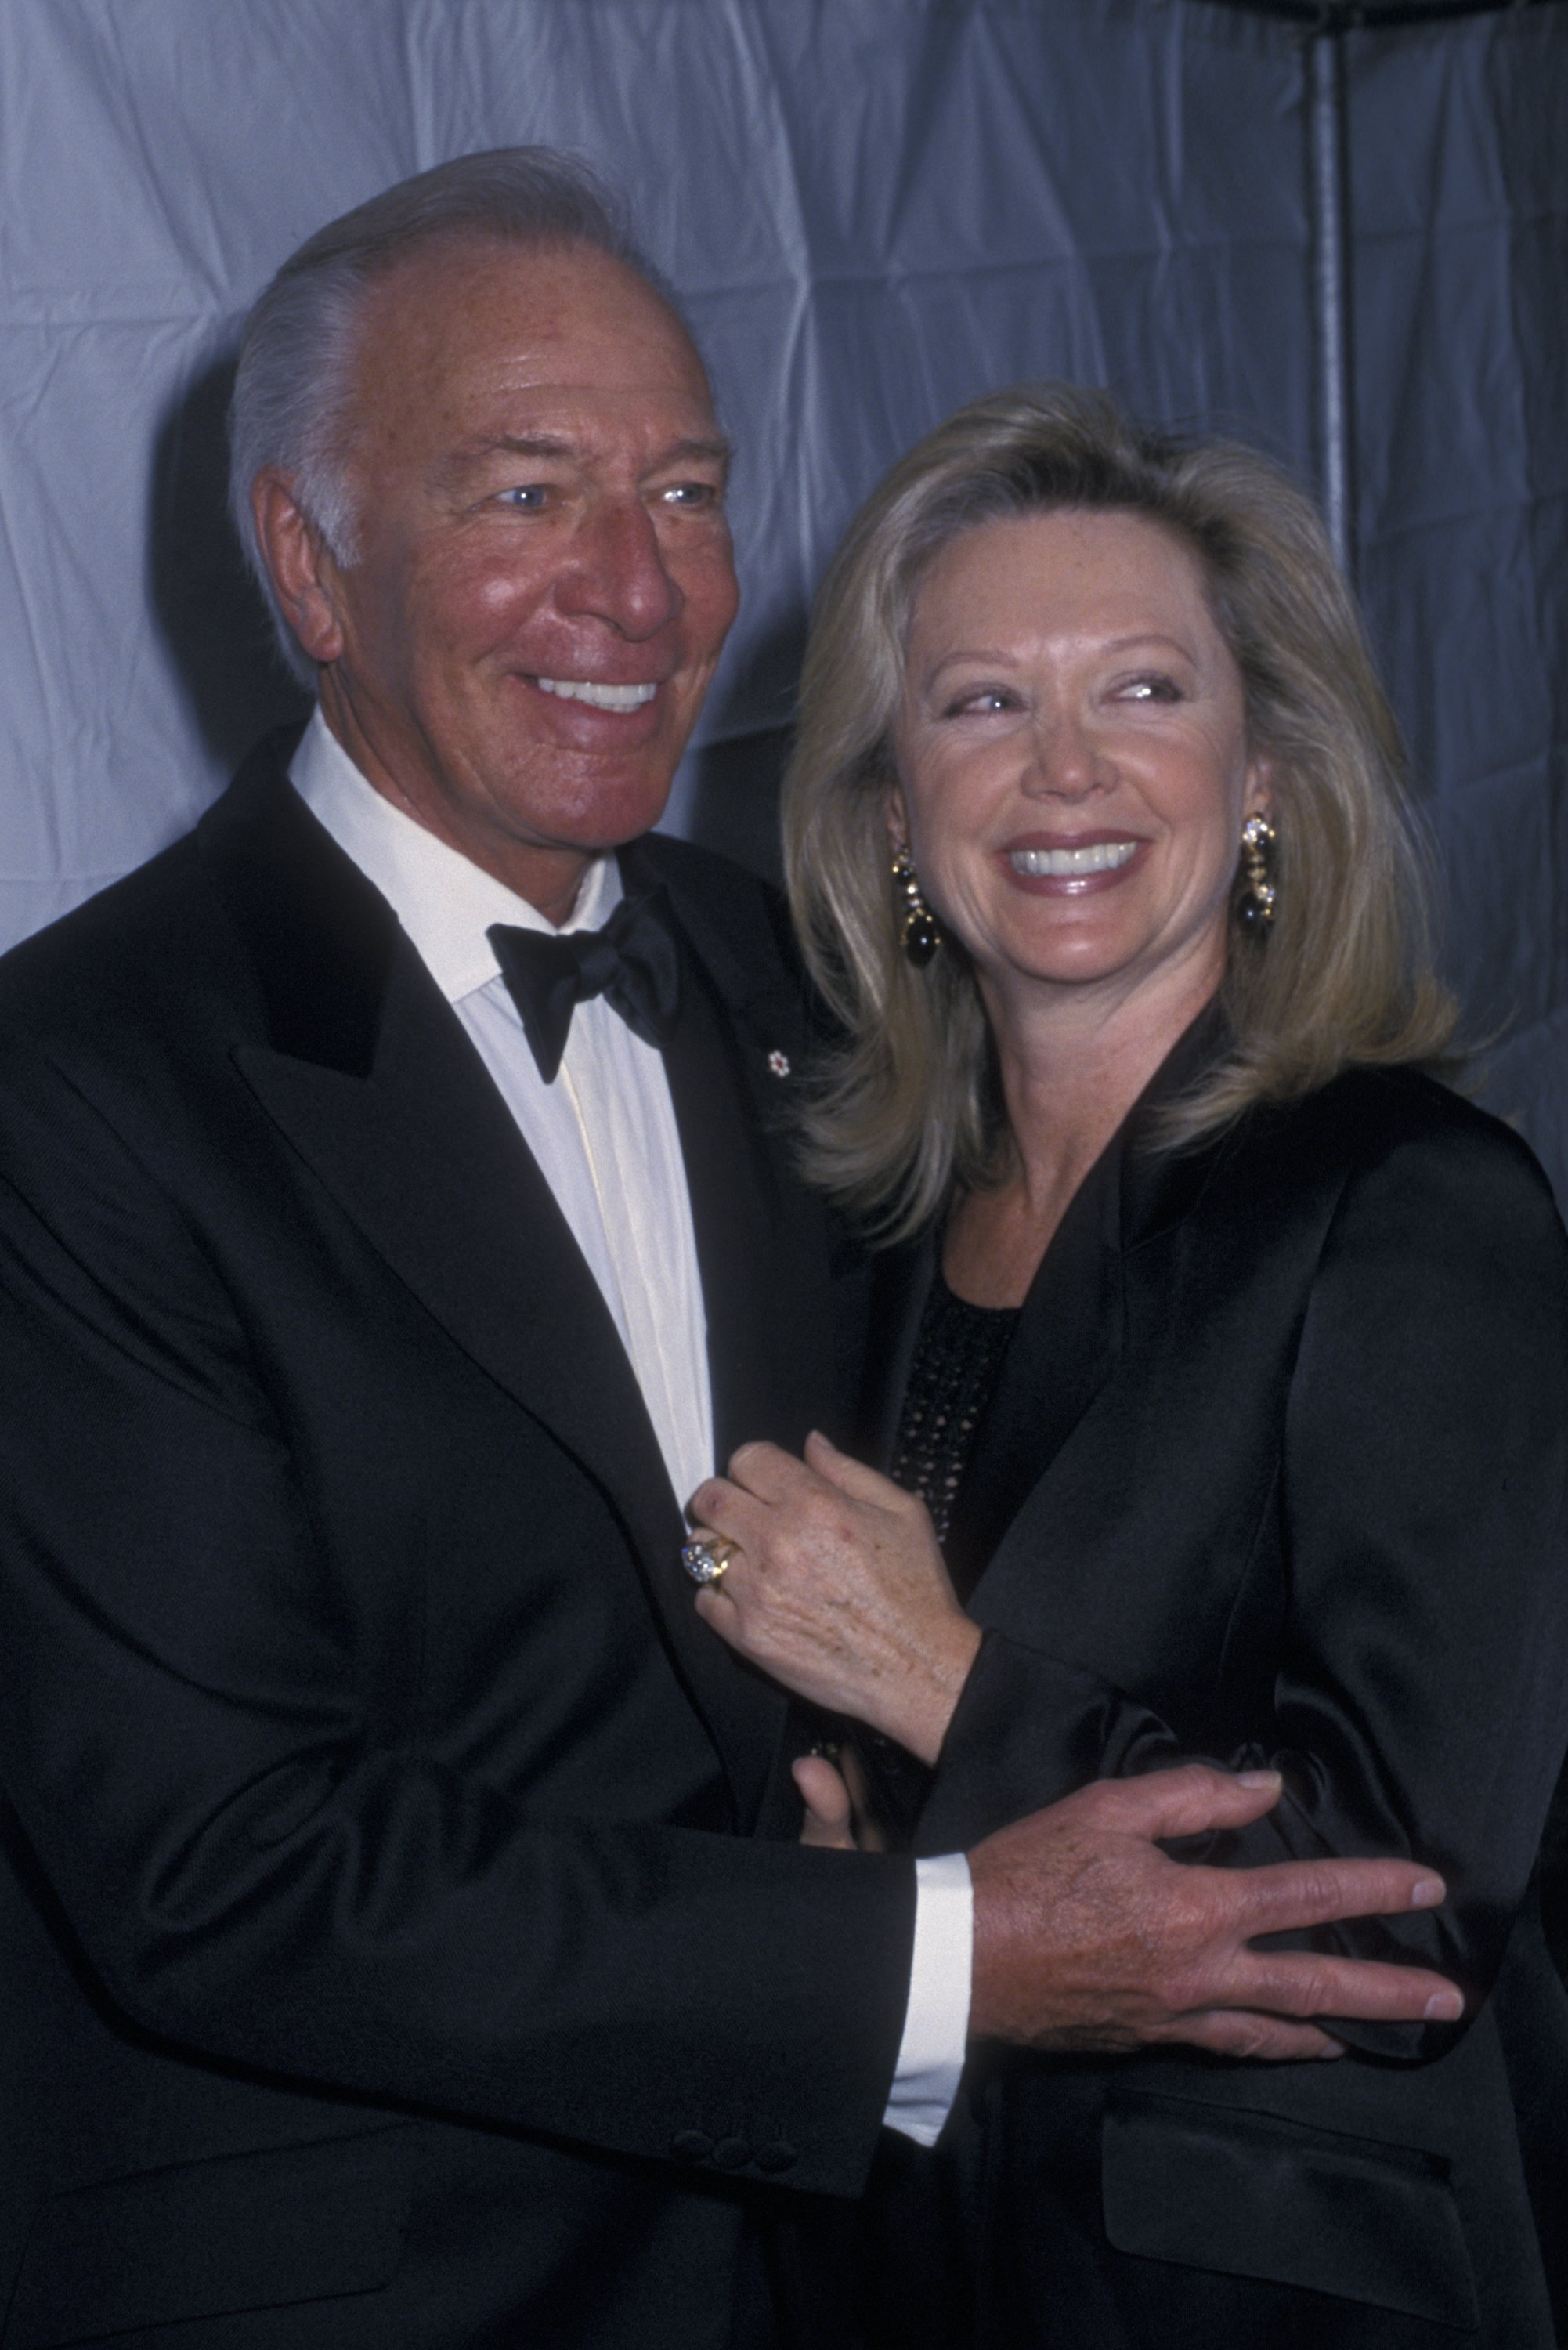 Christopher Plummer and Elaine Taylor are pictured as they arrive at the Juilliard School Gala Honoring Richard Rogers on February 4, 2002, at the Juilliard School in New York City | Source: Getty Images